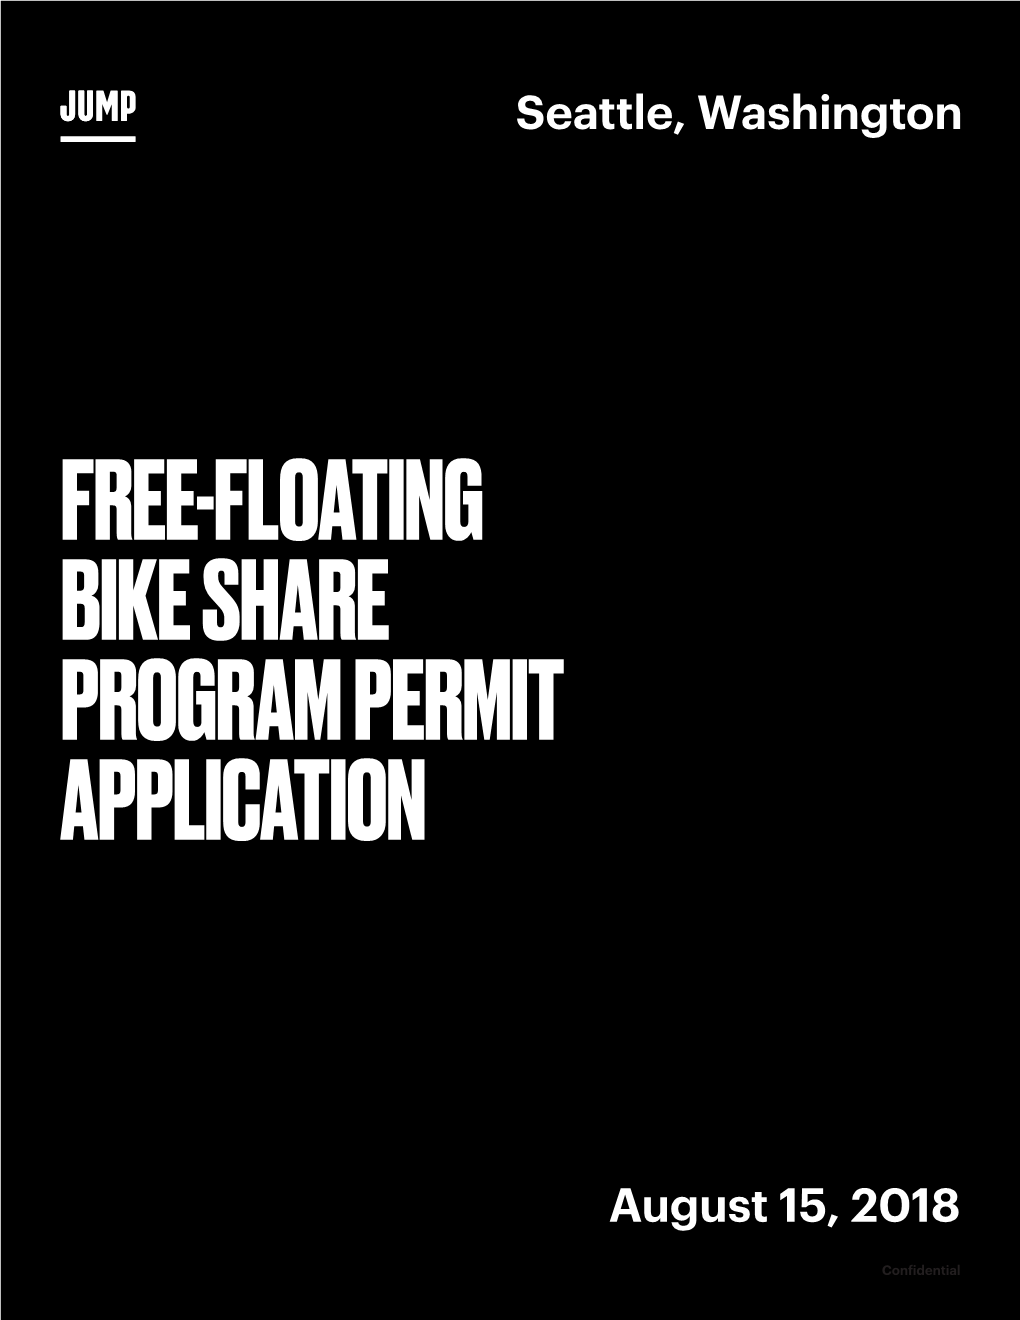 JUMP Bikes (“JUMP”), Is Pleased to Respond to Seattle’S Free-Floating Bike Share Program Permit